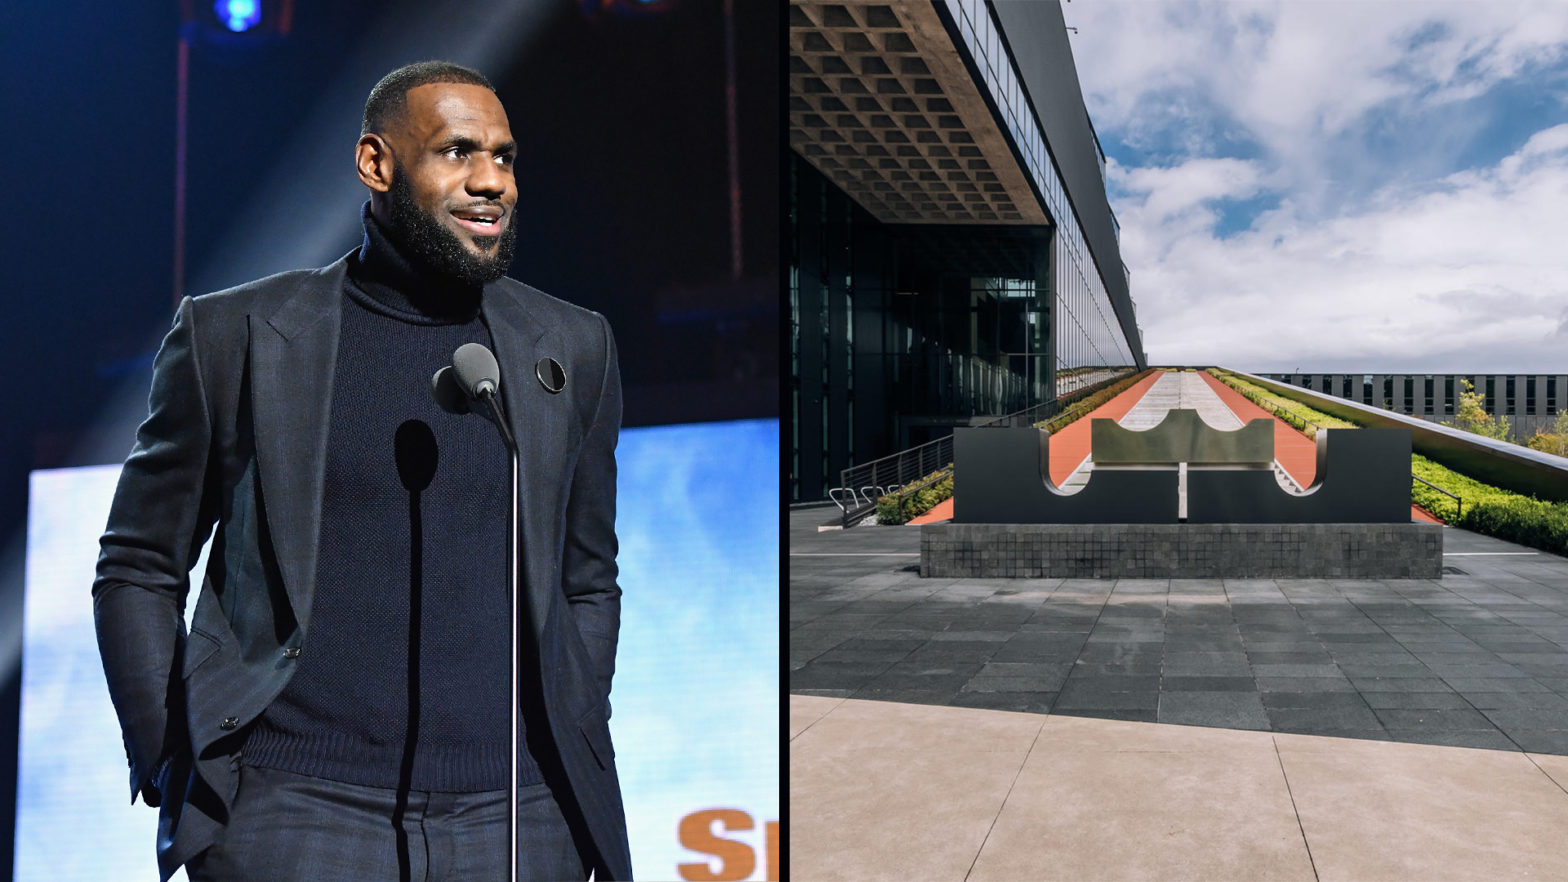 'Bron, You Gotta Get One Of These' — LeBron James Goes From Being In Awe At Nike Buildings On Campus As A Teen To Now Having His Own